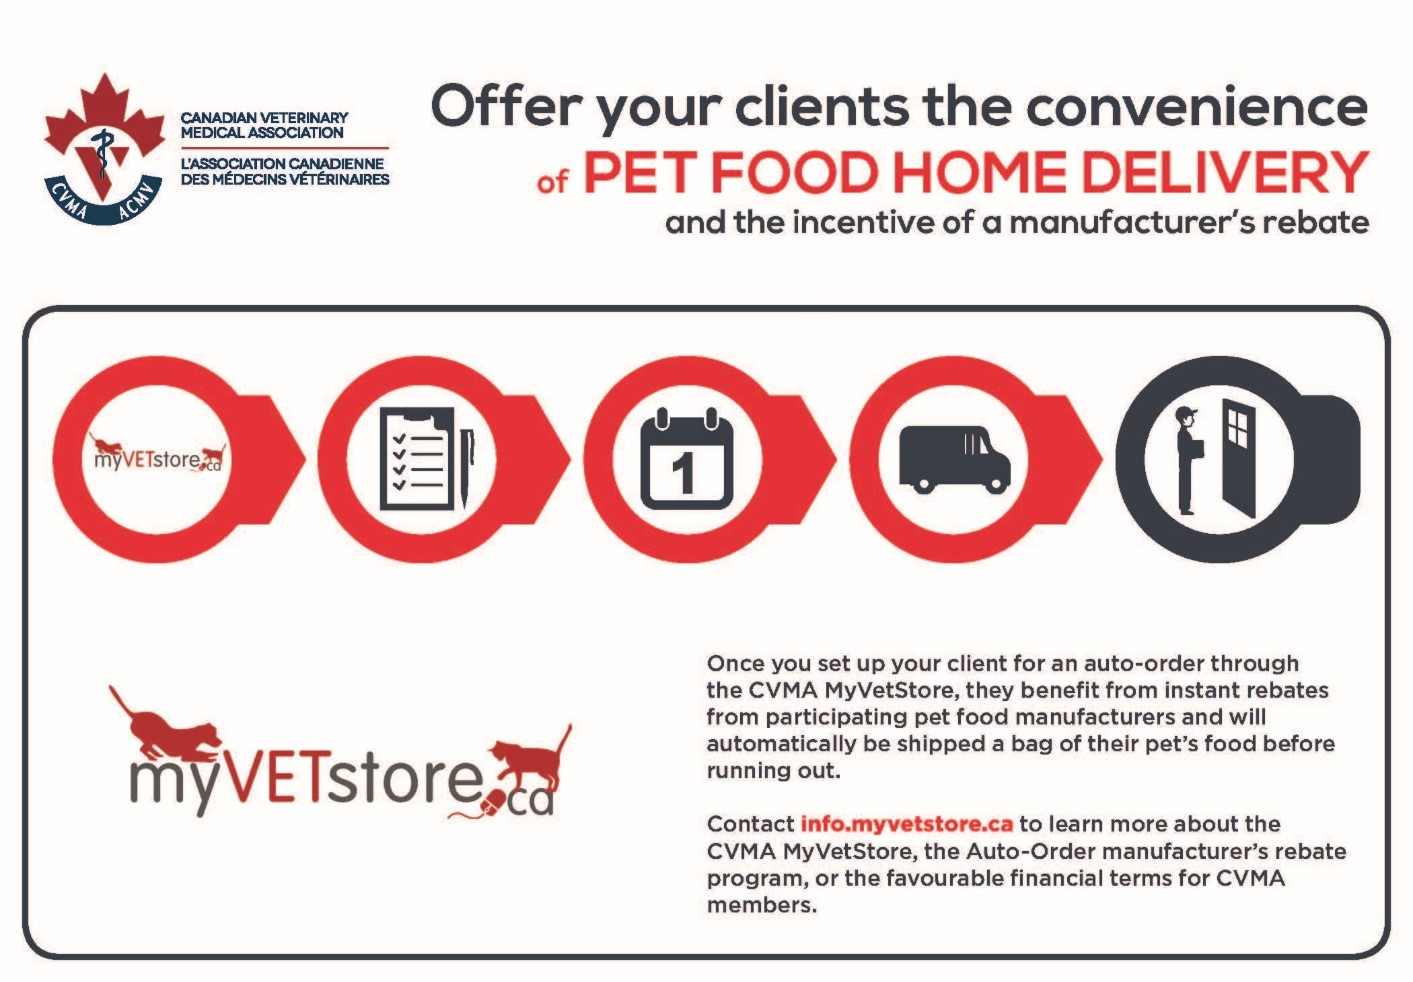 In times when social distancing is required as a result of the COVID-19 pandemic, the CVMA WebStore – MyVetStore.ca is here to support you.  Offer your clients the benefits of home delivery of your pet’s veterinarian approved products and diets, as well as a wide range of non-prescription items.